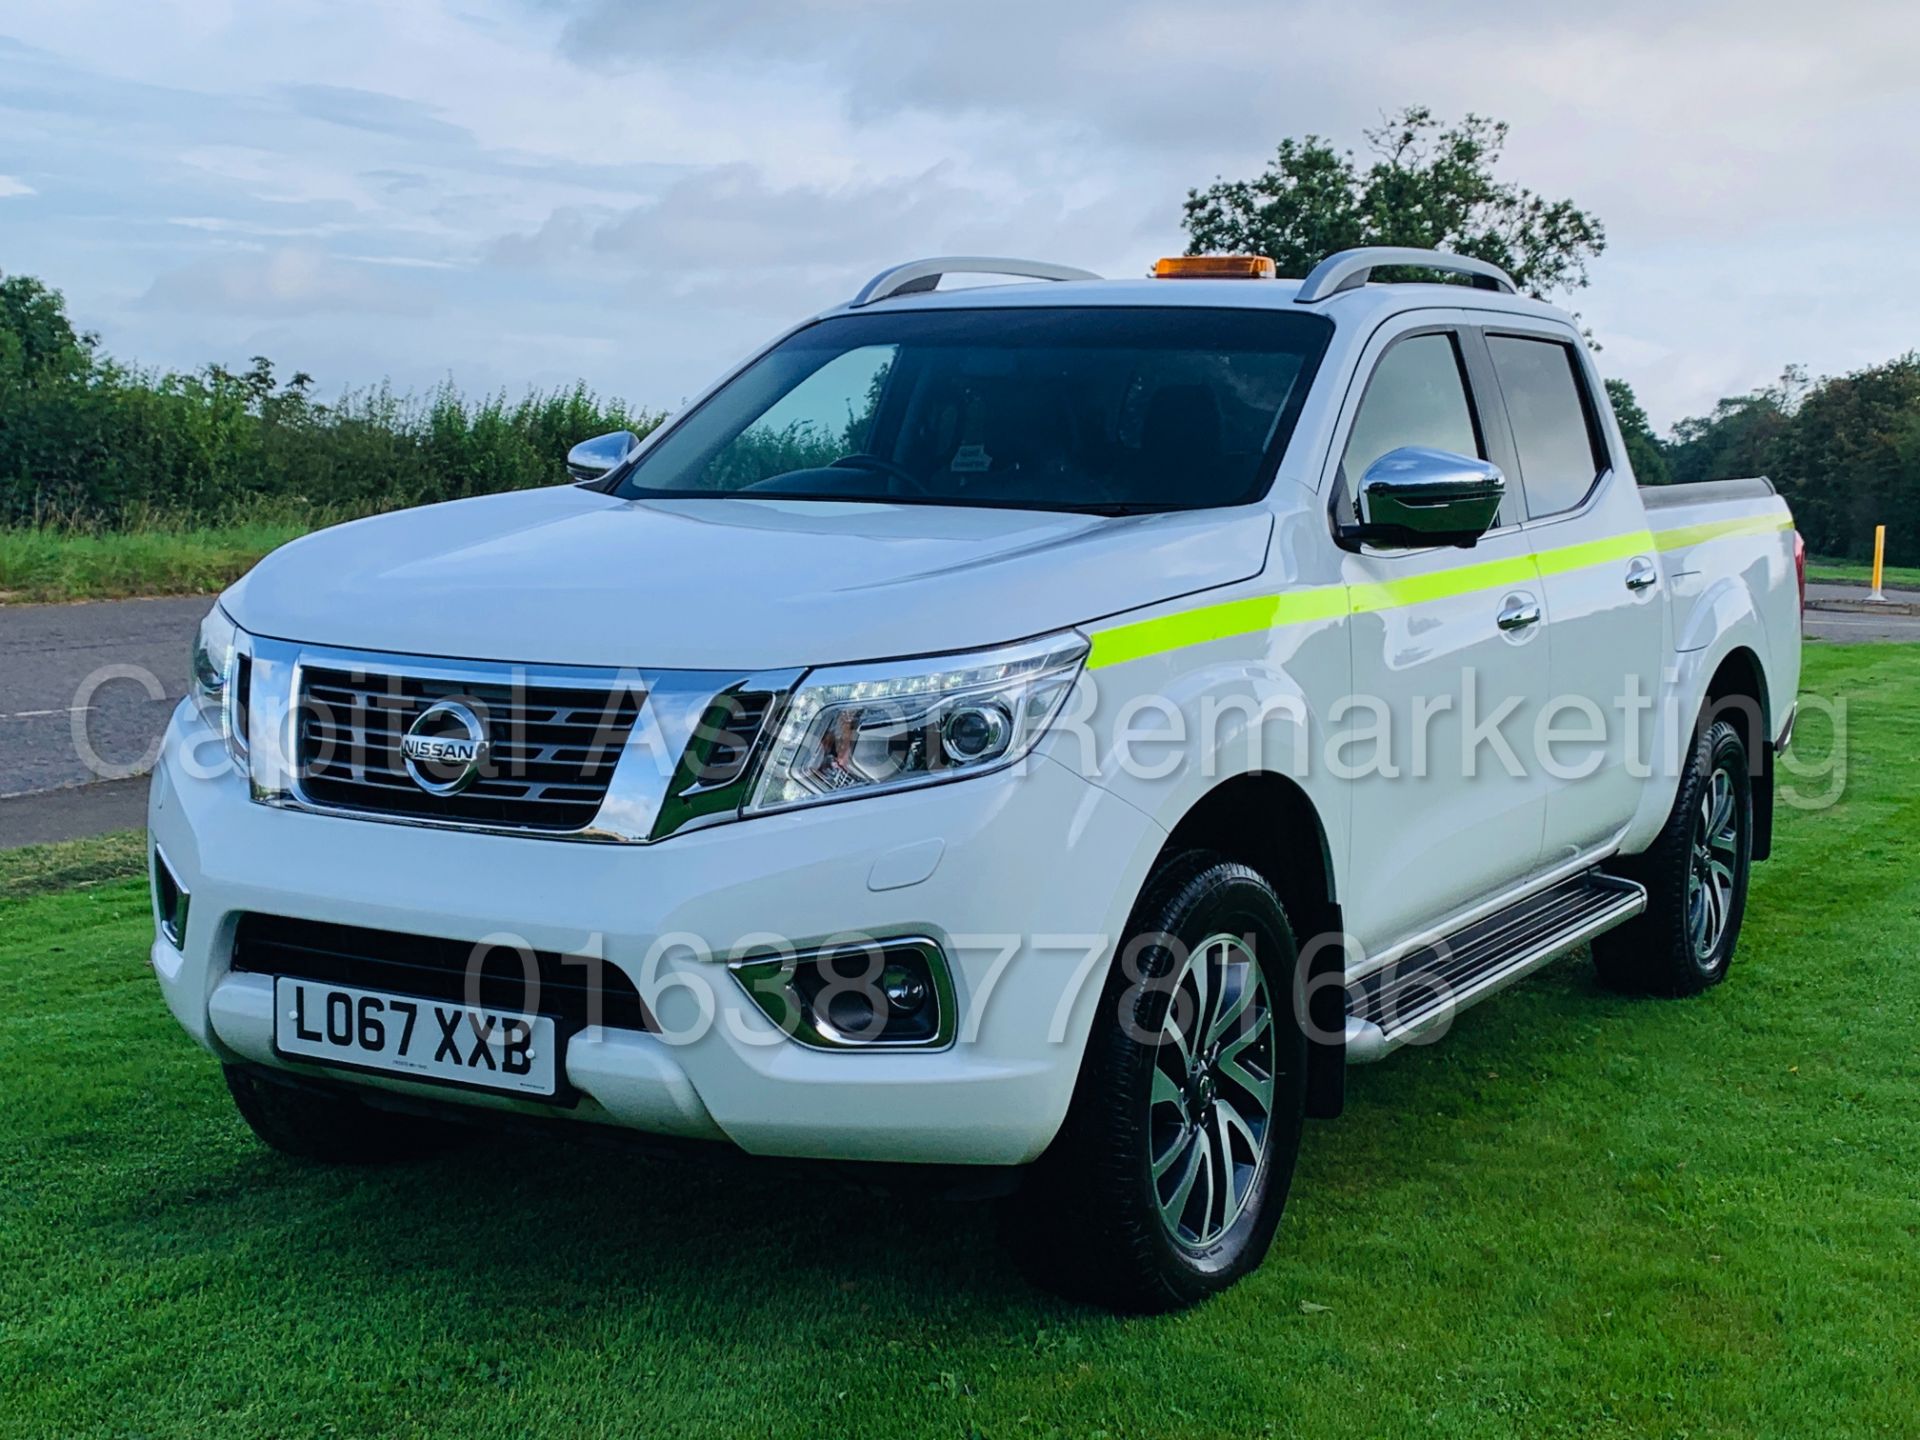 (On Sale) NISSAN NAVARA *TEKNA EDITION* DOUBLE CAB PICK-UP (67 REG) '2.3 DCI - 6 SPEED' (1 OWNER) - Image 5 of 58